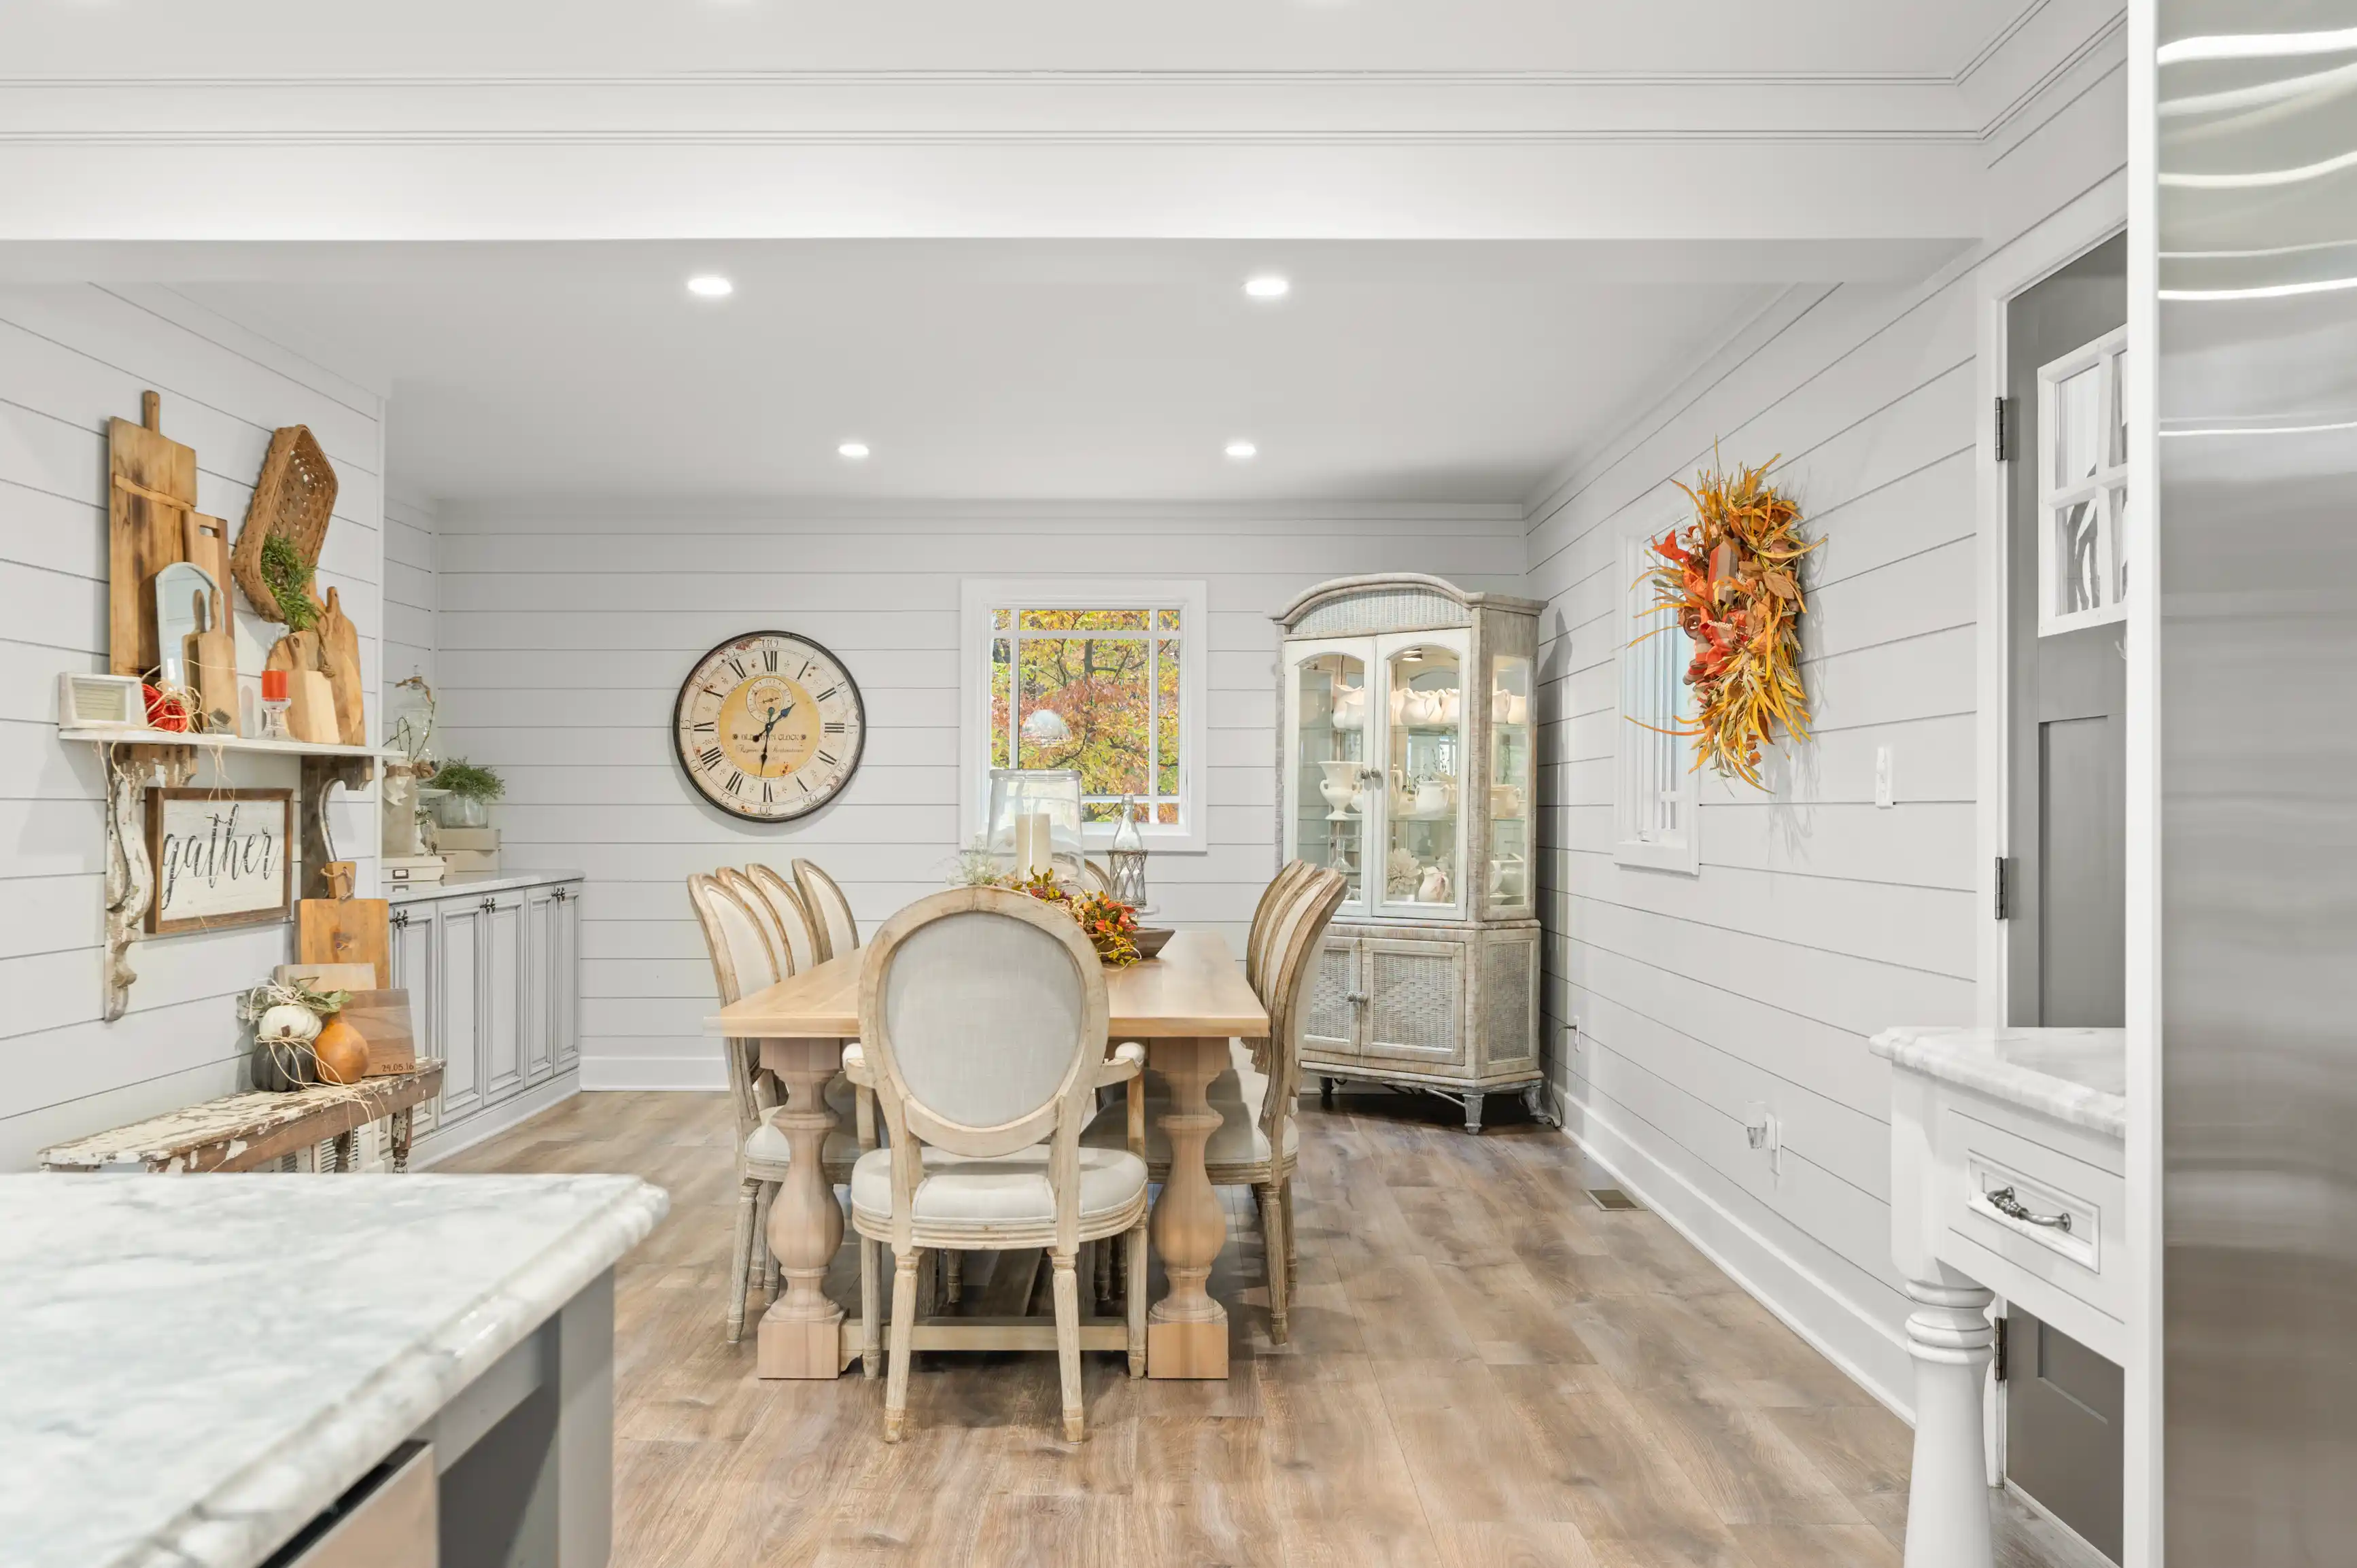 Bright and inviting dining room with a rustic wooden table and chairs, shiplap walls, autumn decor accents, and a vintage-style cabinet.